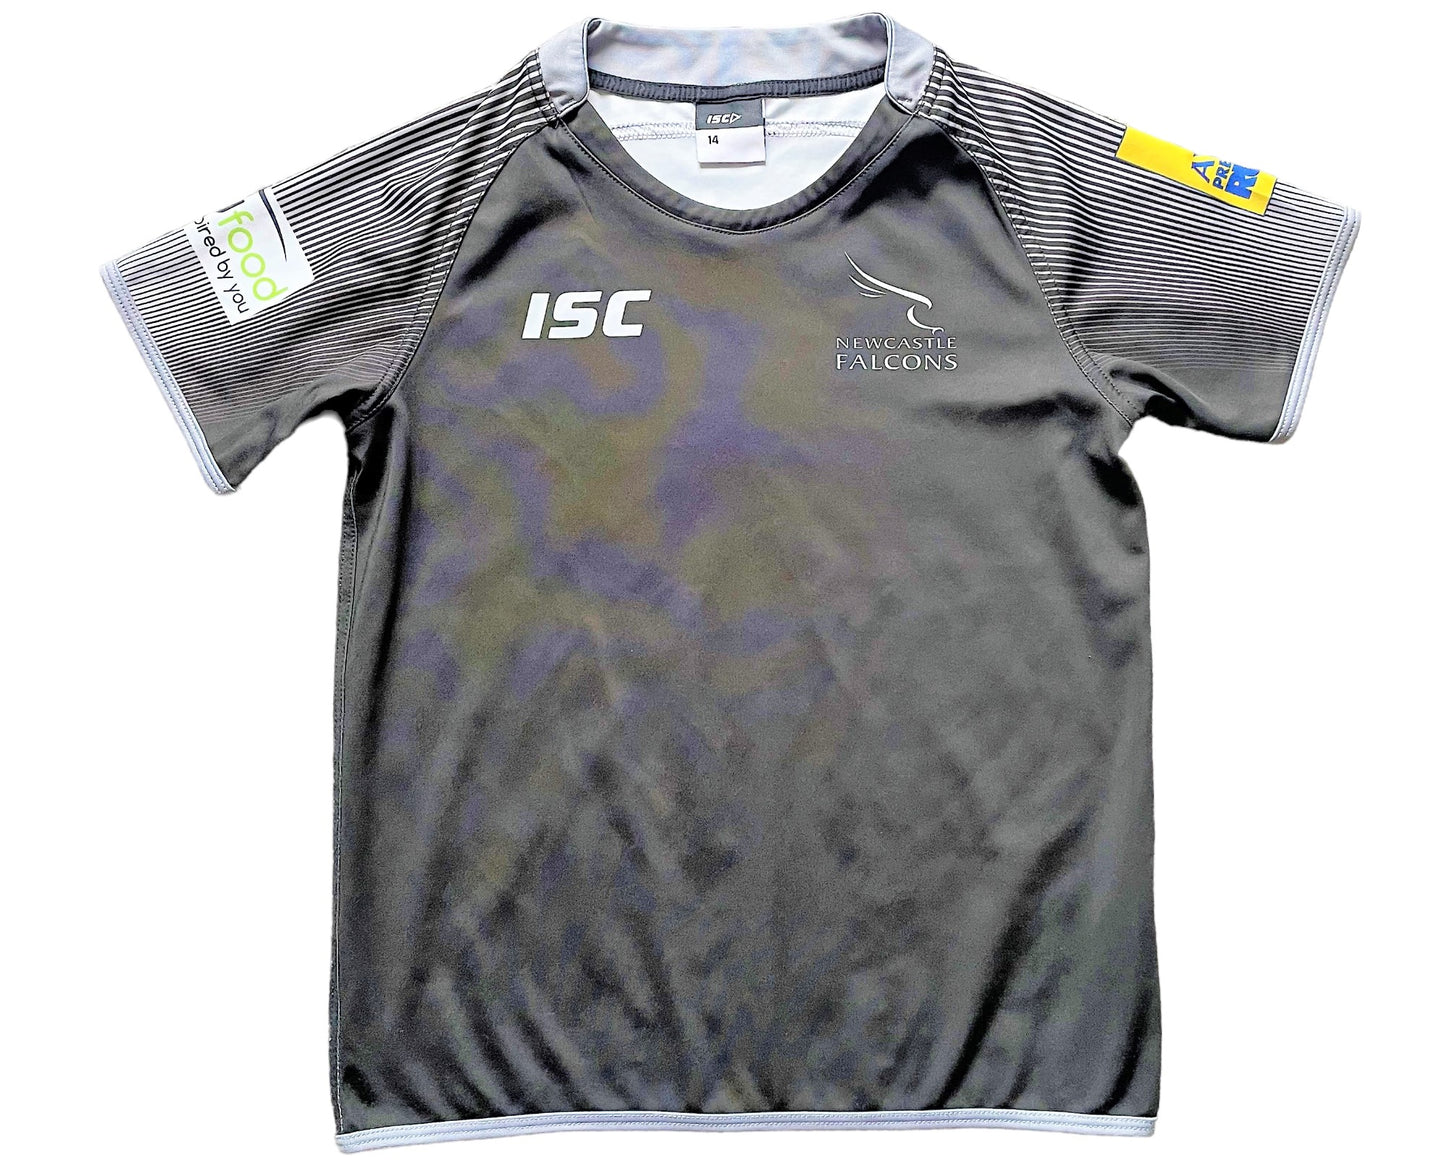 Newcastle Falcons Rugby Shirt 2017 (very good) Ladies 14